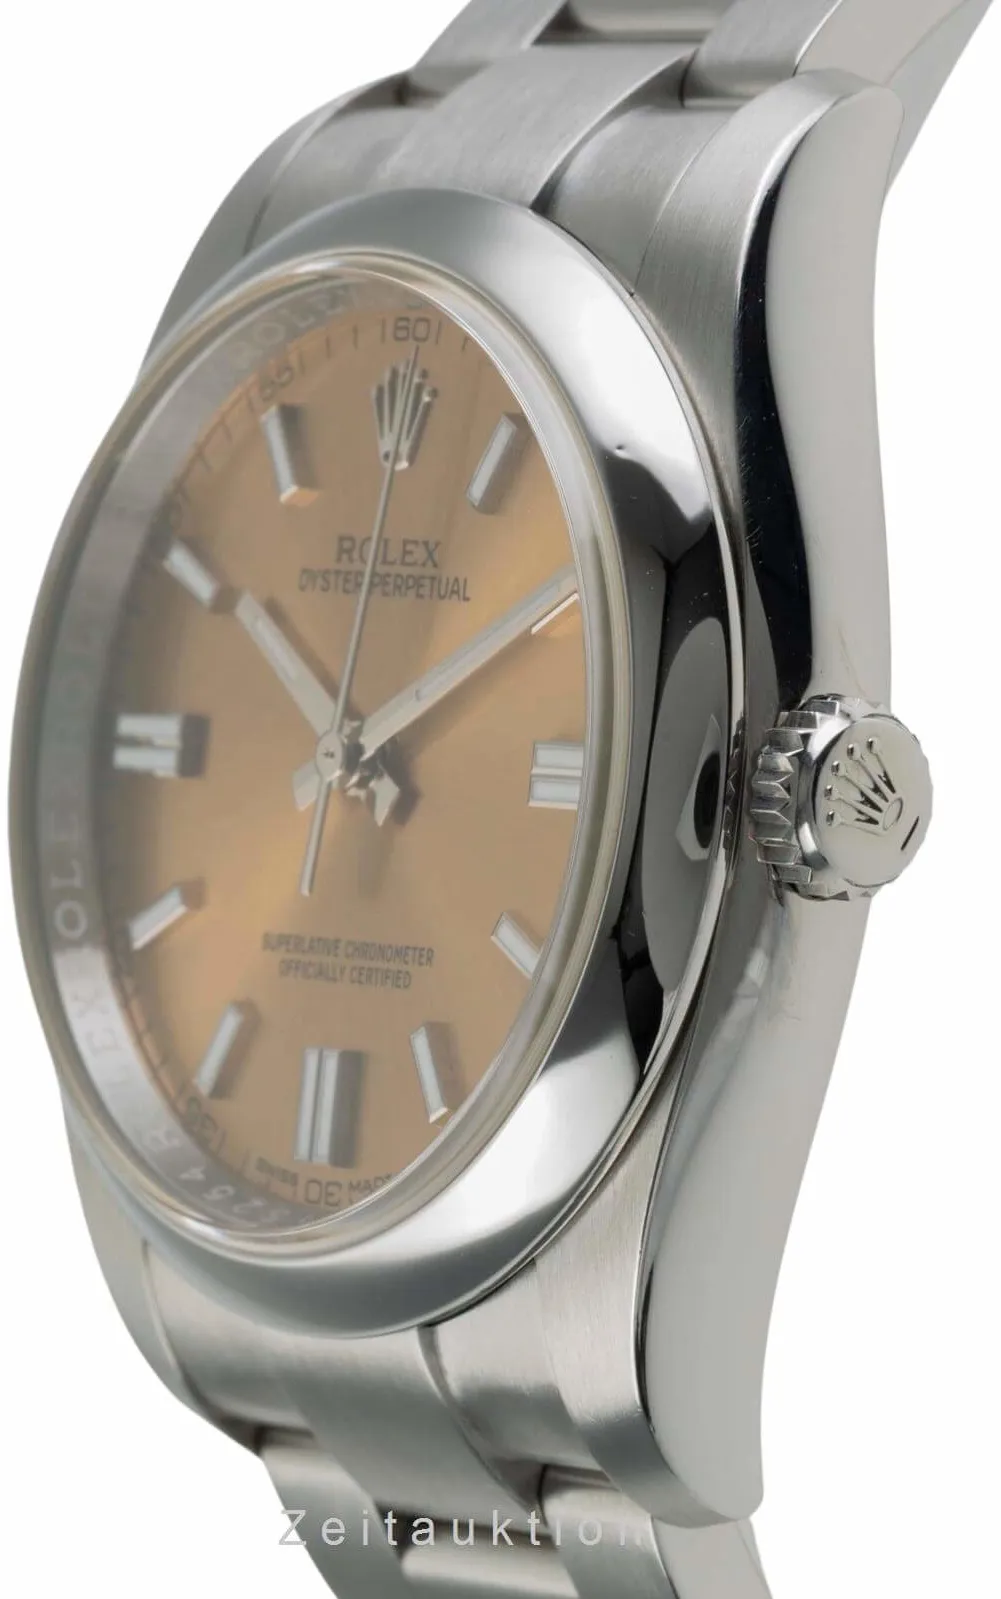 Rolex Oyster Perpetual 116000 36mm Stainless steel 5